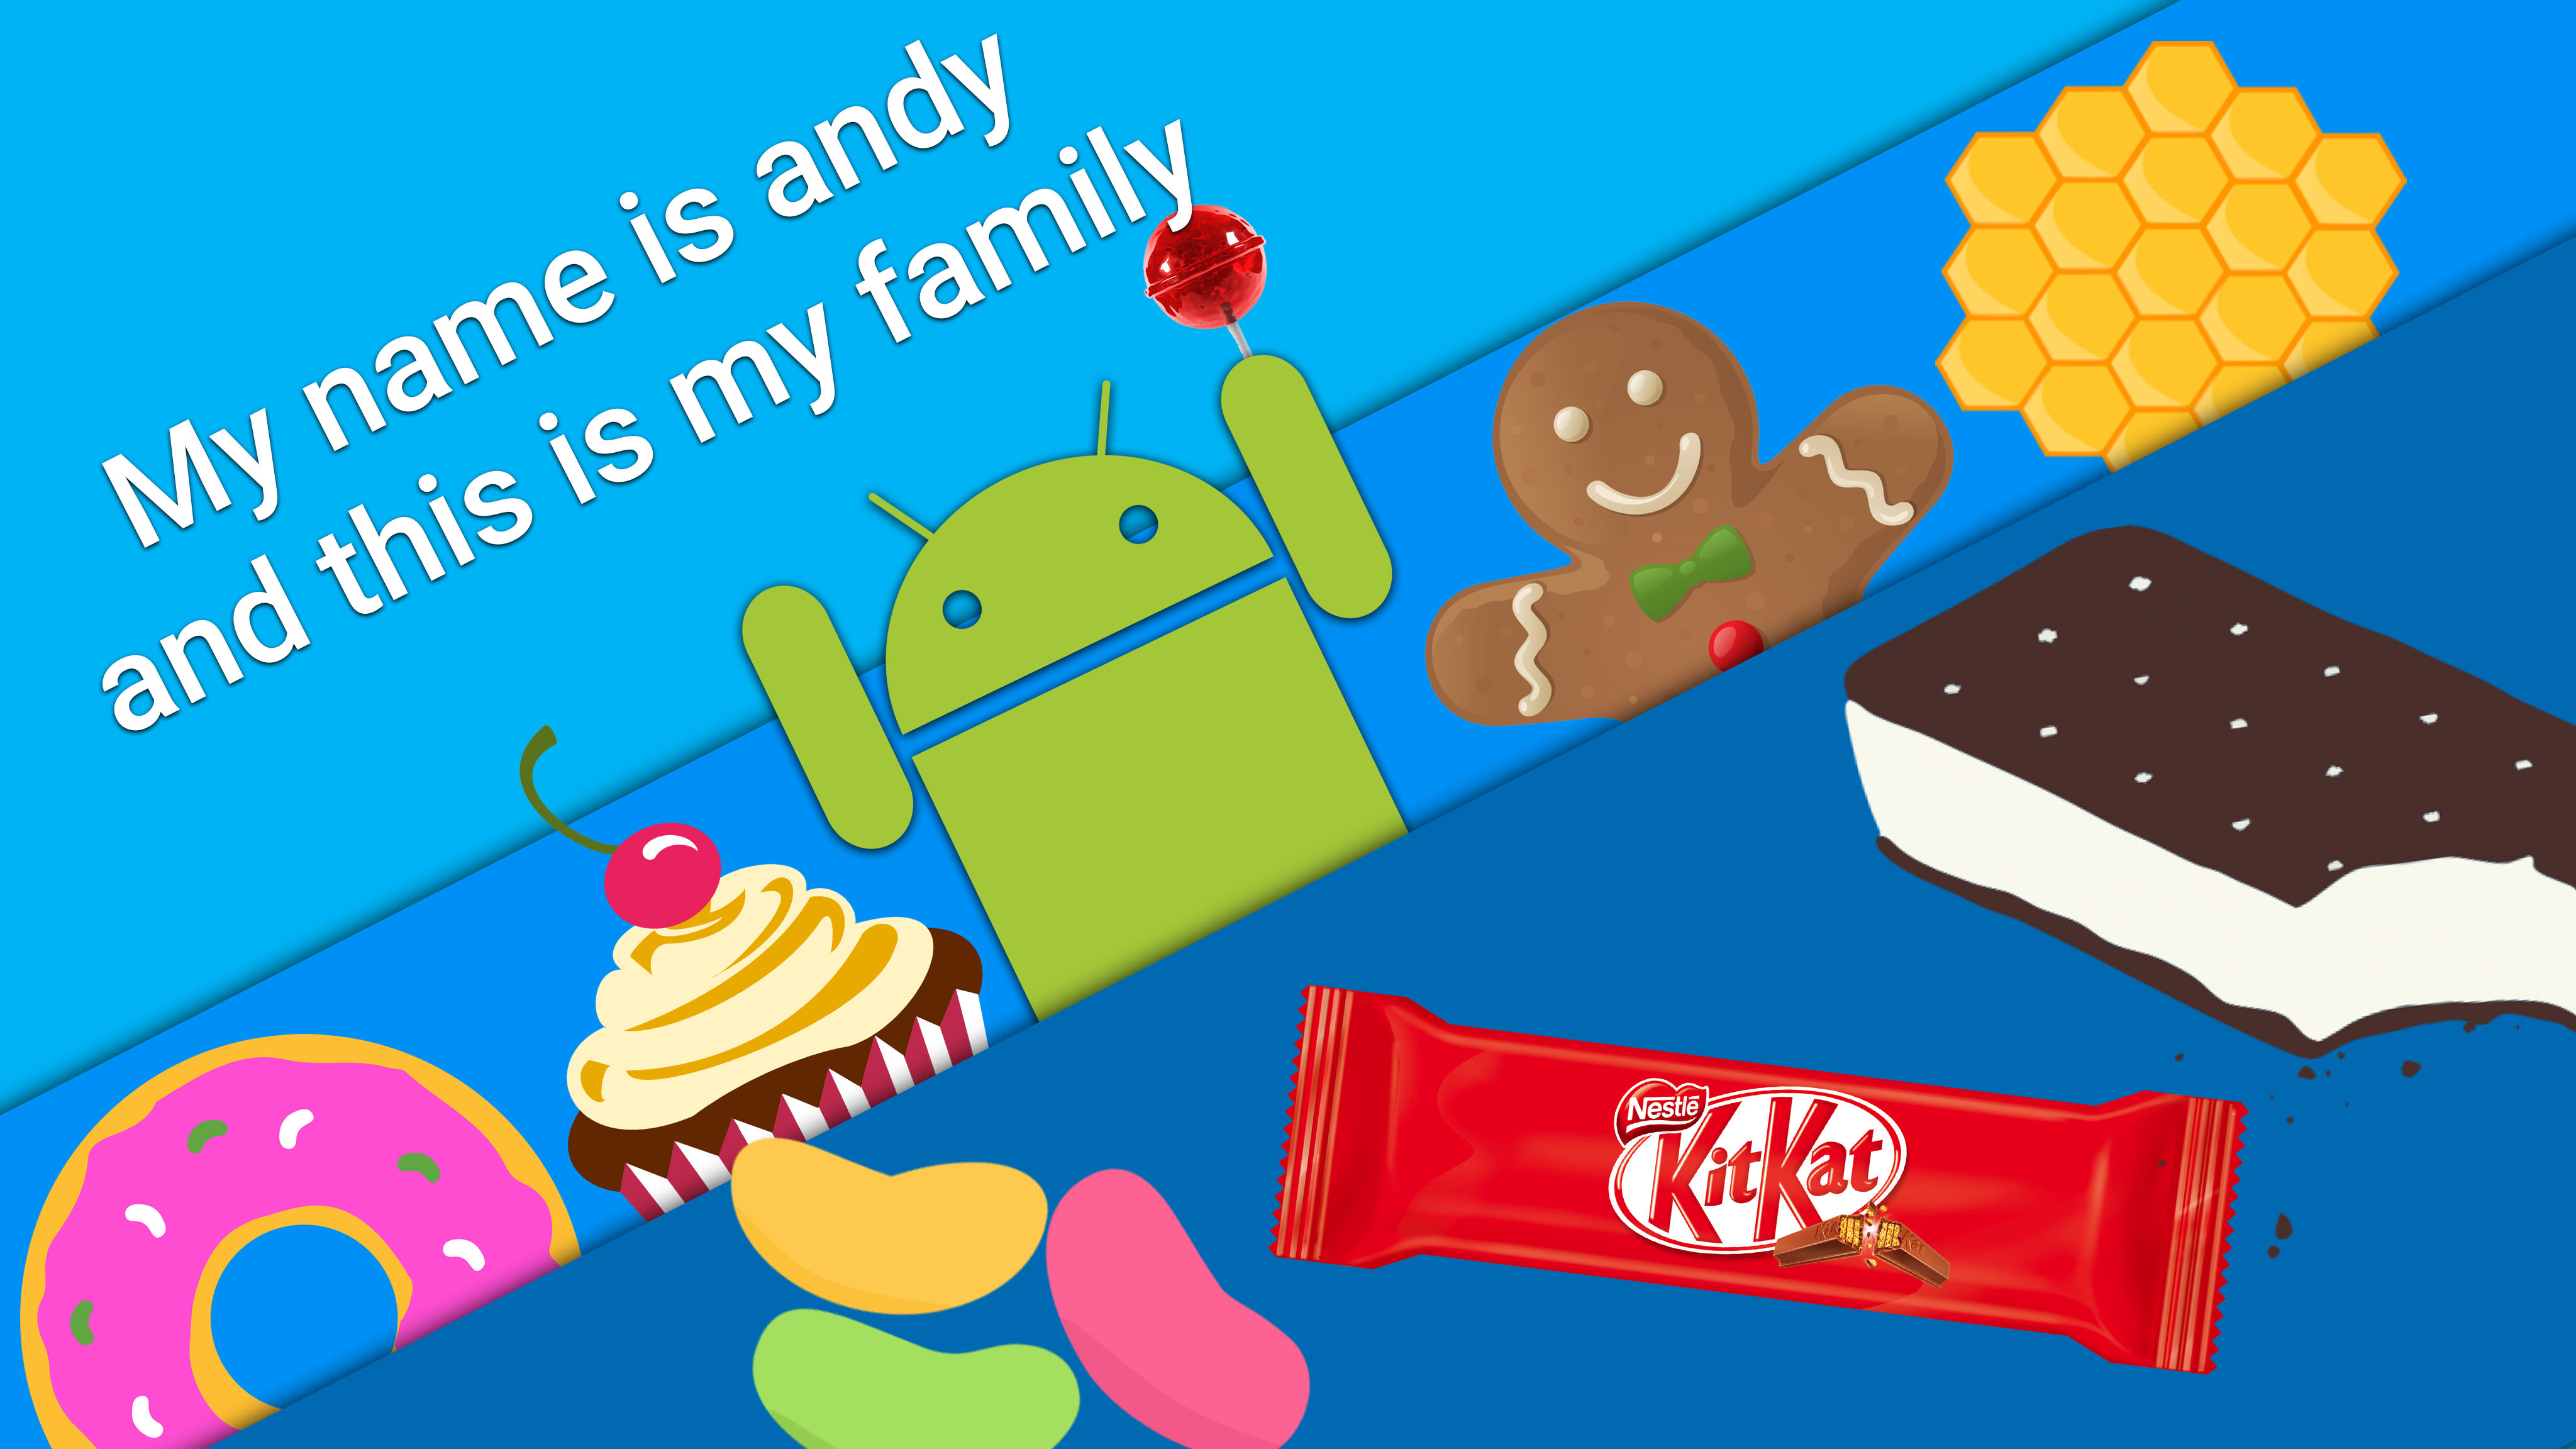 General 4096x2304 operating system Android (operating system) candy typography food sweets KitKat donut cupcakes lollipop gingerbread man